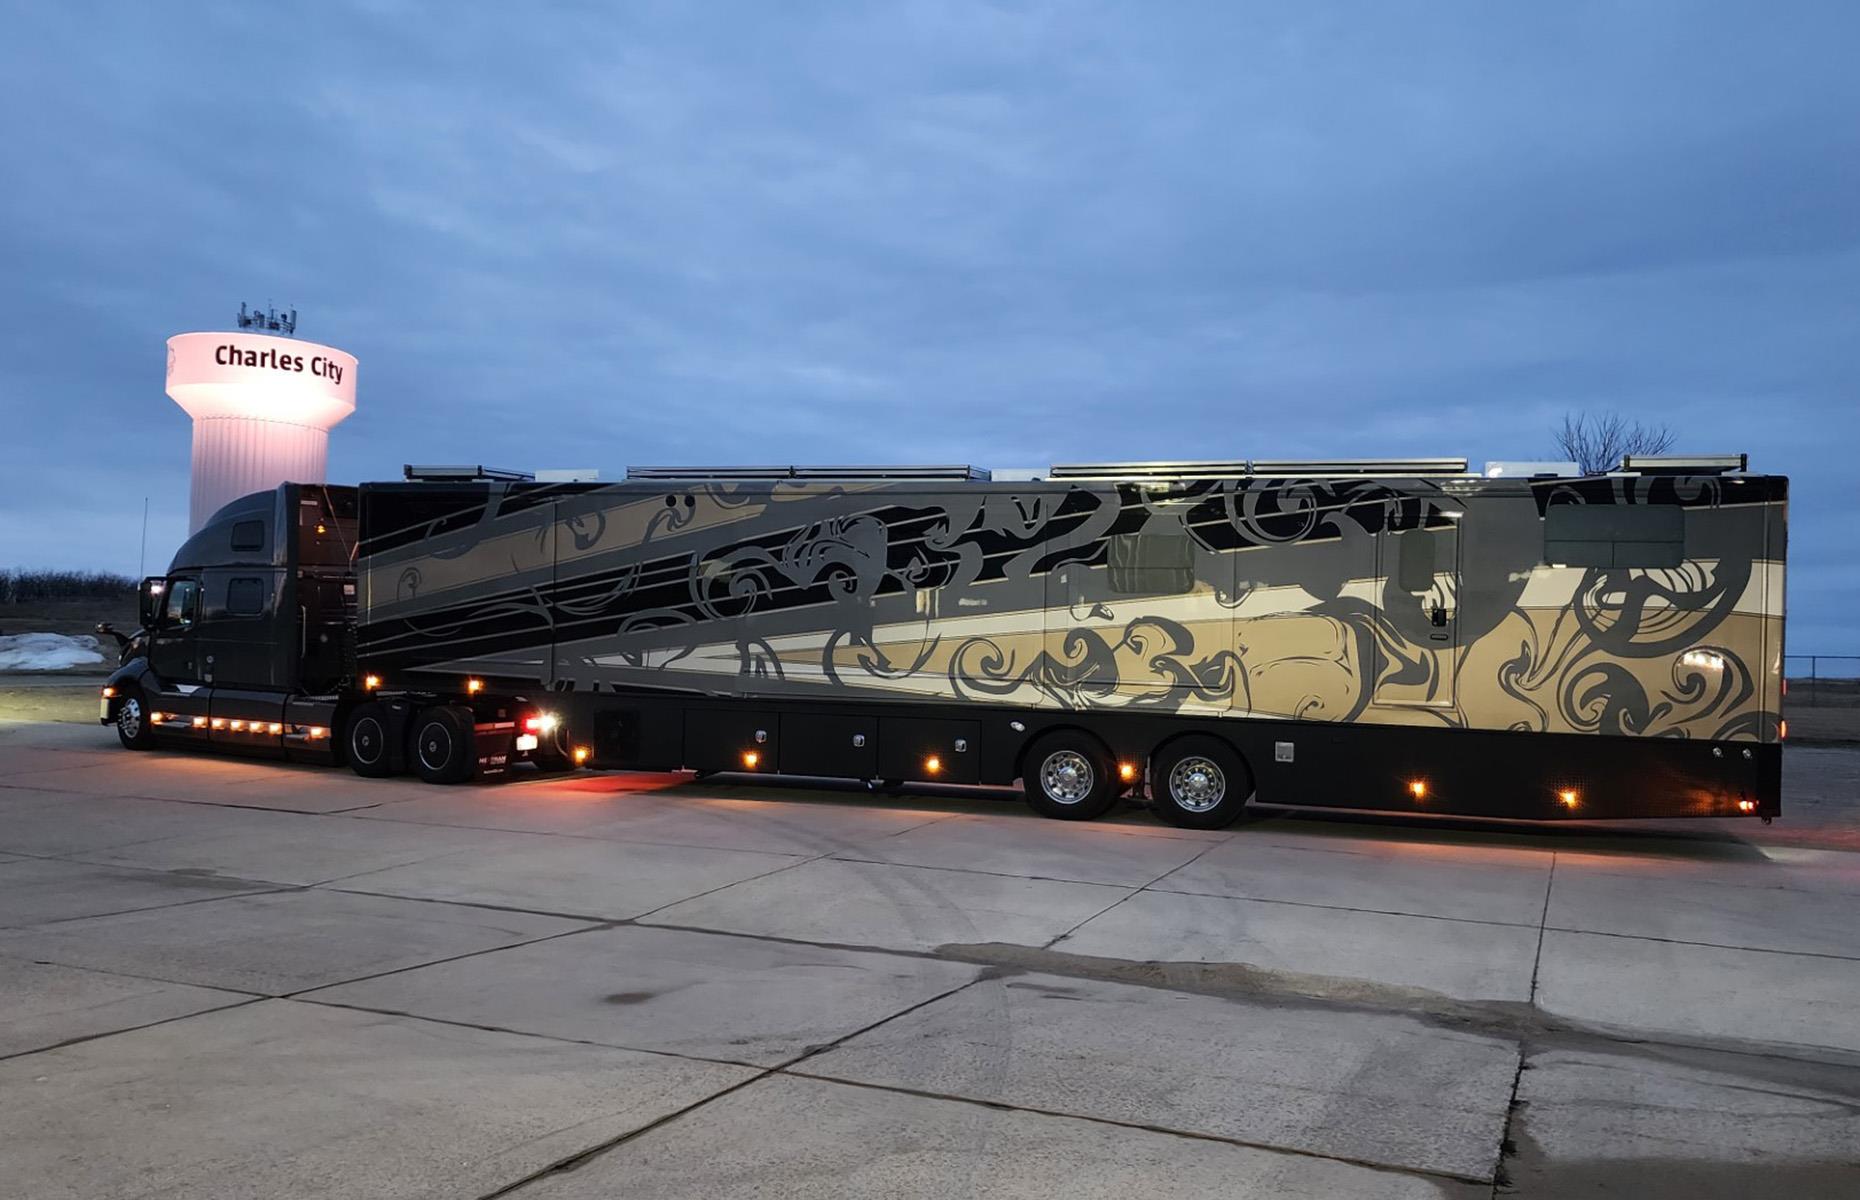 <p>Missouri-based <a href="https://spacecraftmfg.com/">SpaceCraft</a> creates some of the longest, most beautifully decked-out trailers on the market. Established in 1962, it's the only company in the US to make fully customized fifth wheel, travel trailer, and semi RV units. </p>  <p>SpaceCraft allows its clientele extensive customization options to create a space that's perfect for their needs, meaning each trailer made by the company is a one-off design.</p>